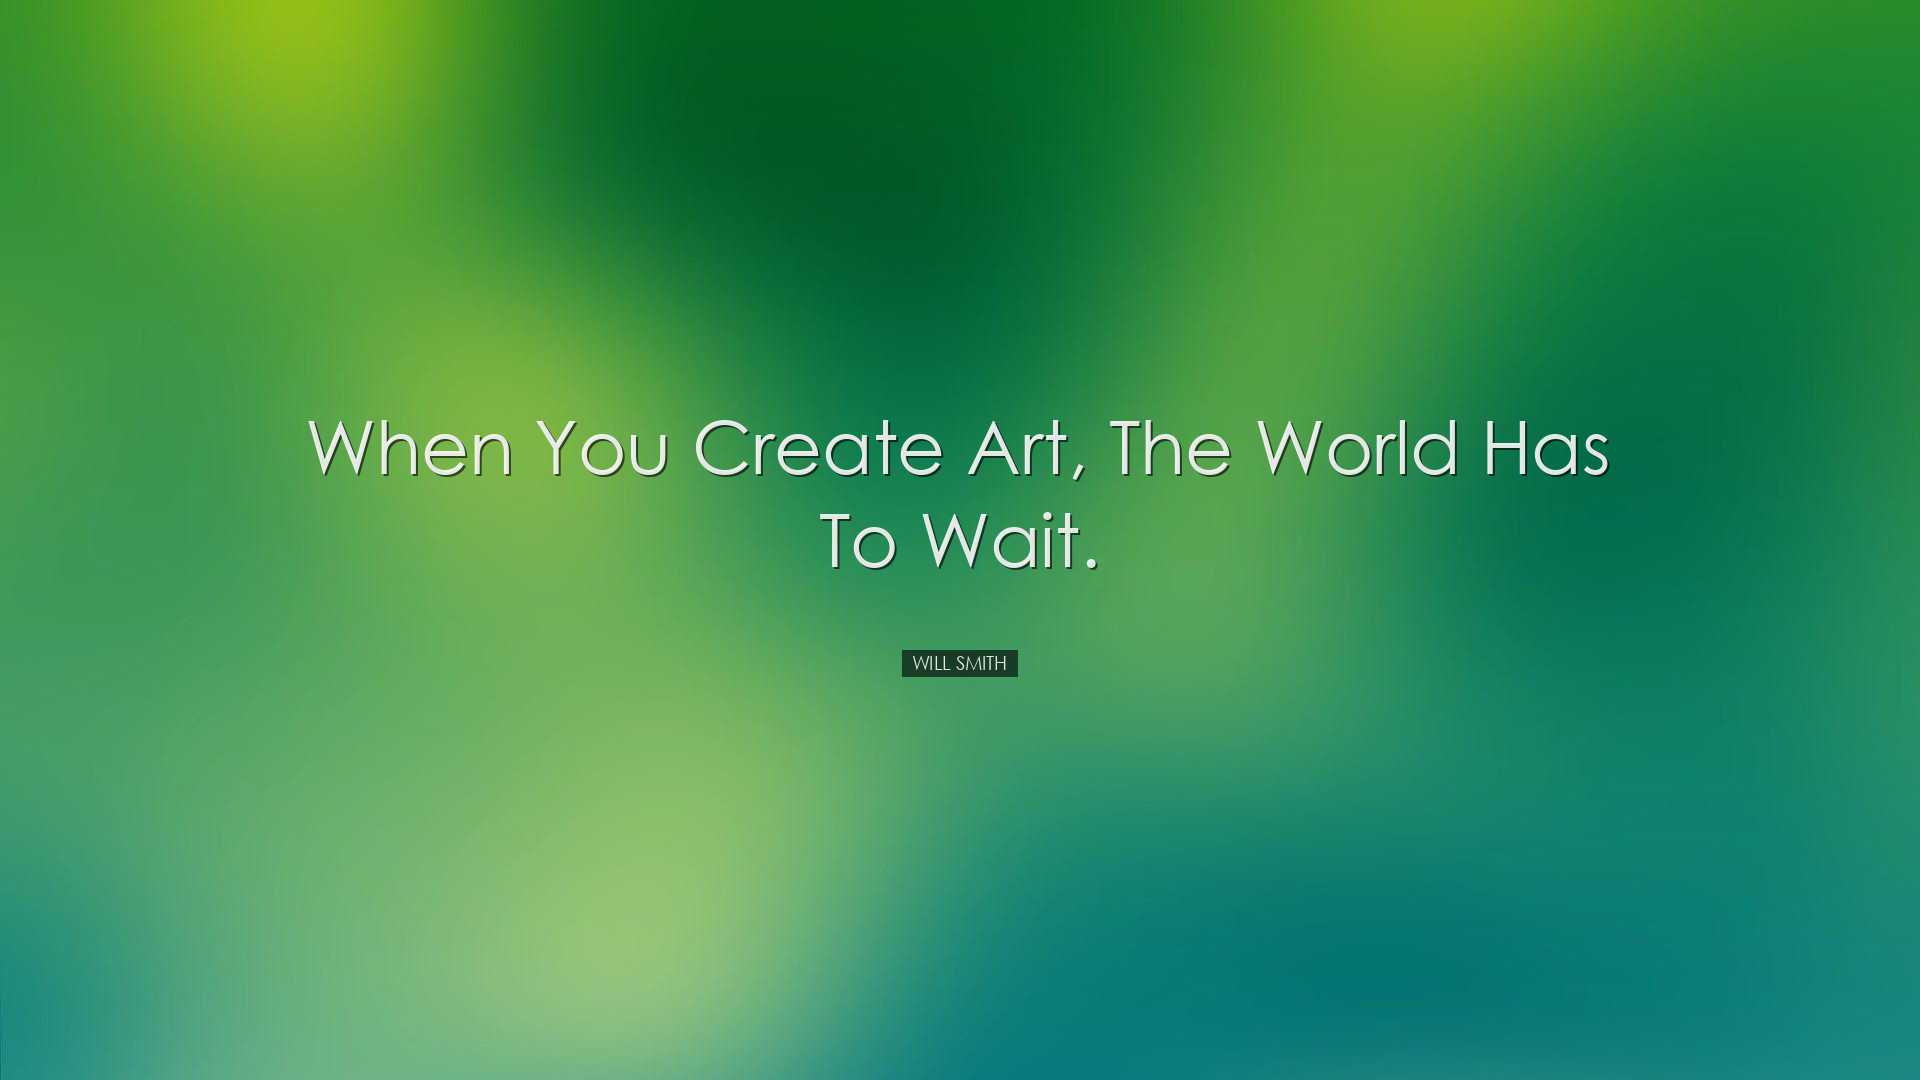 When you create art, the world has to wait. - Will Smith